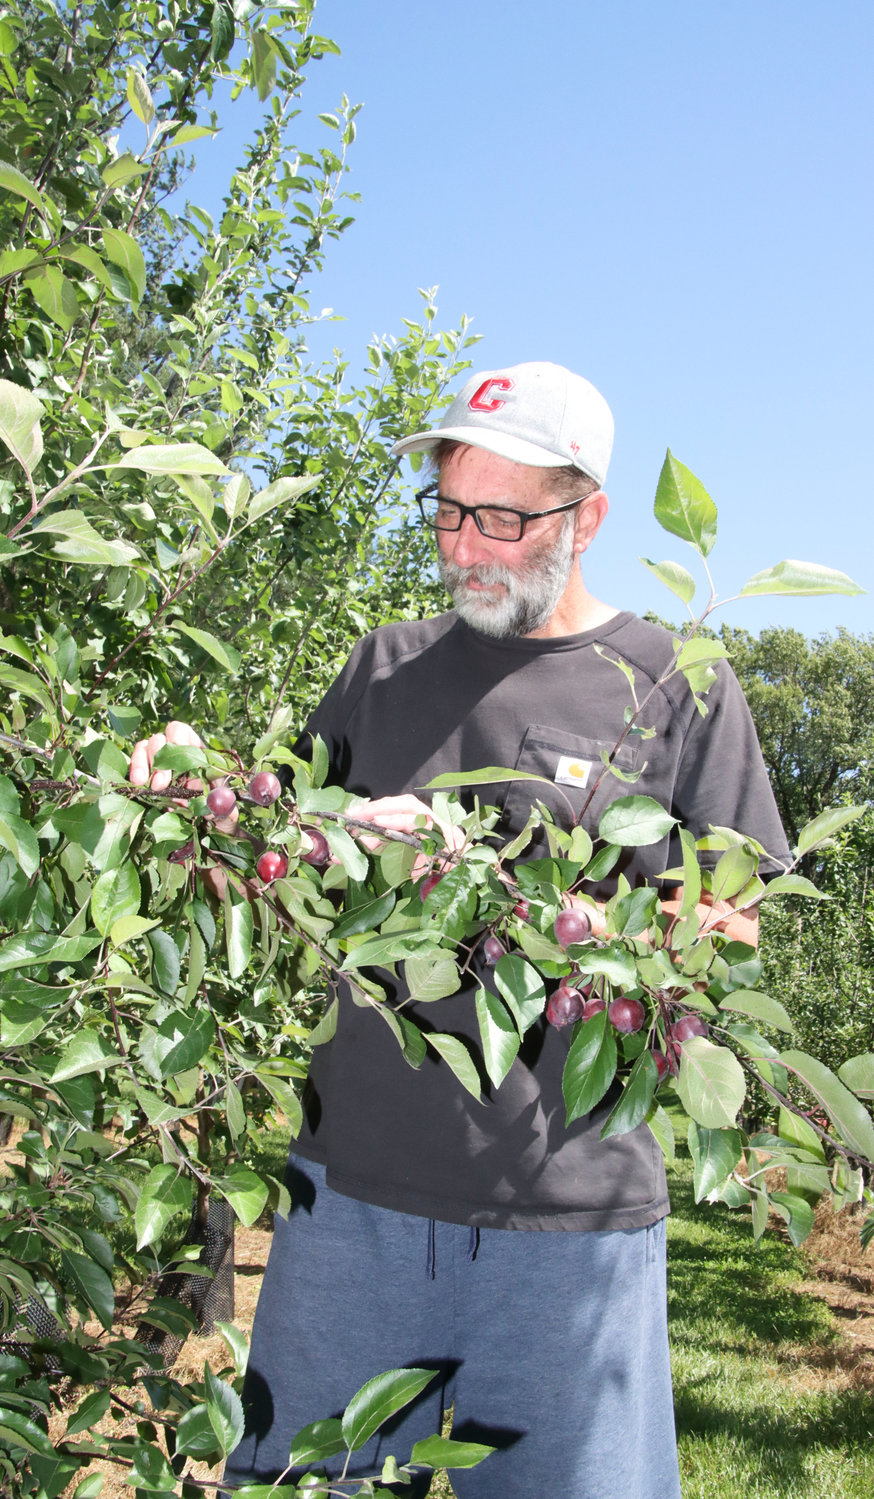 John and Dianna Romanick started Bridgehouse Cider in 2020. John planted 14 trees in 2019, and in 2020, during Covid, he planted an additional 150 trees. The orchard has now expanded to nearly 1,000 trees.